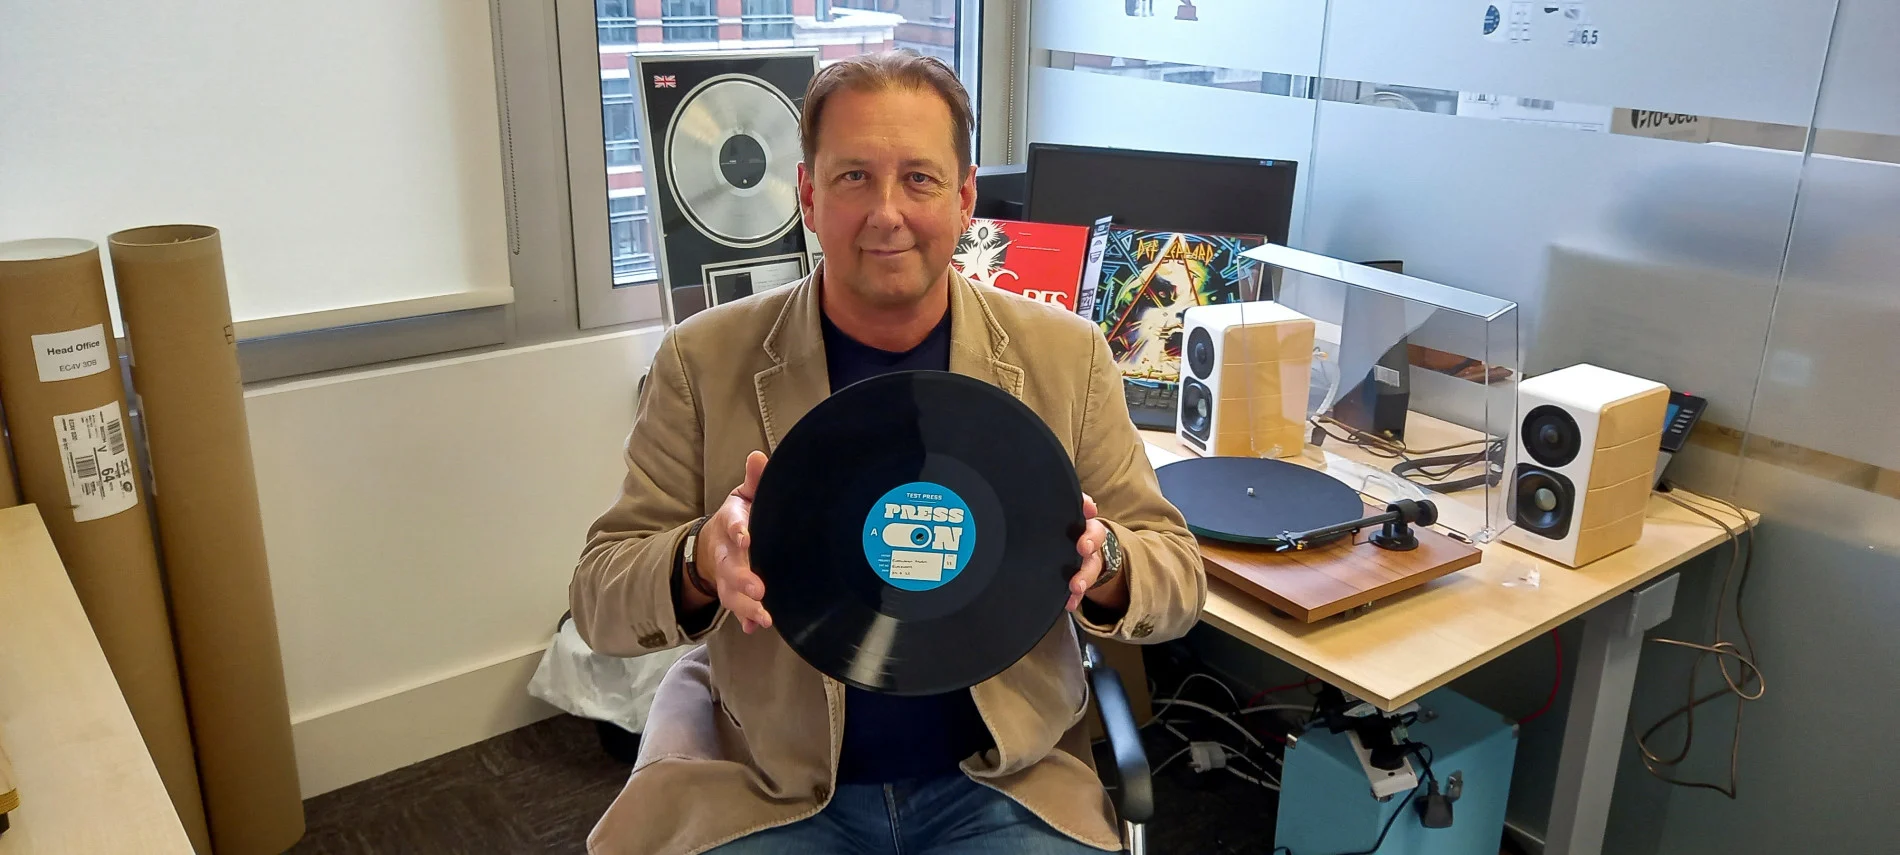 Marc Carey, CEO of Evolution Music, holds a bioplastic record made with a sugar-based alternative to vinyl, in London, Britain September 8, 2022. (REUTERS/Stuart McDill)